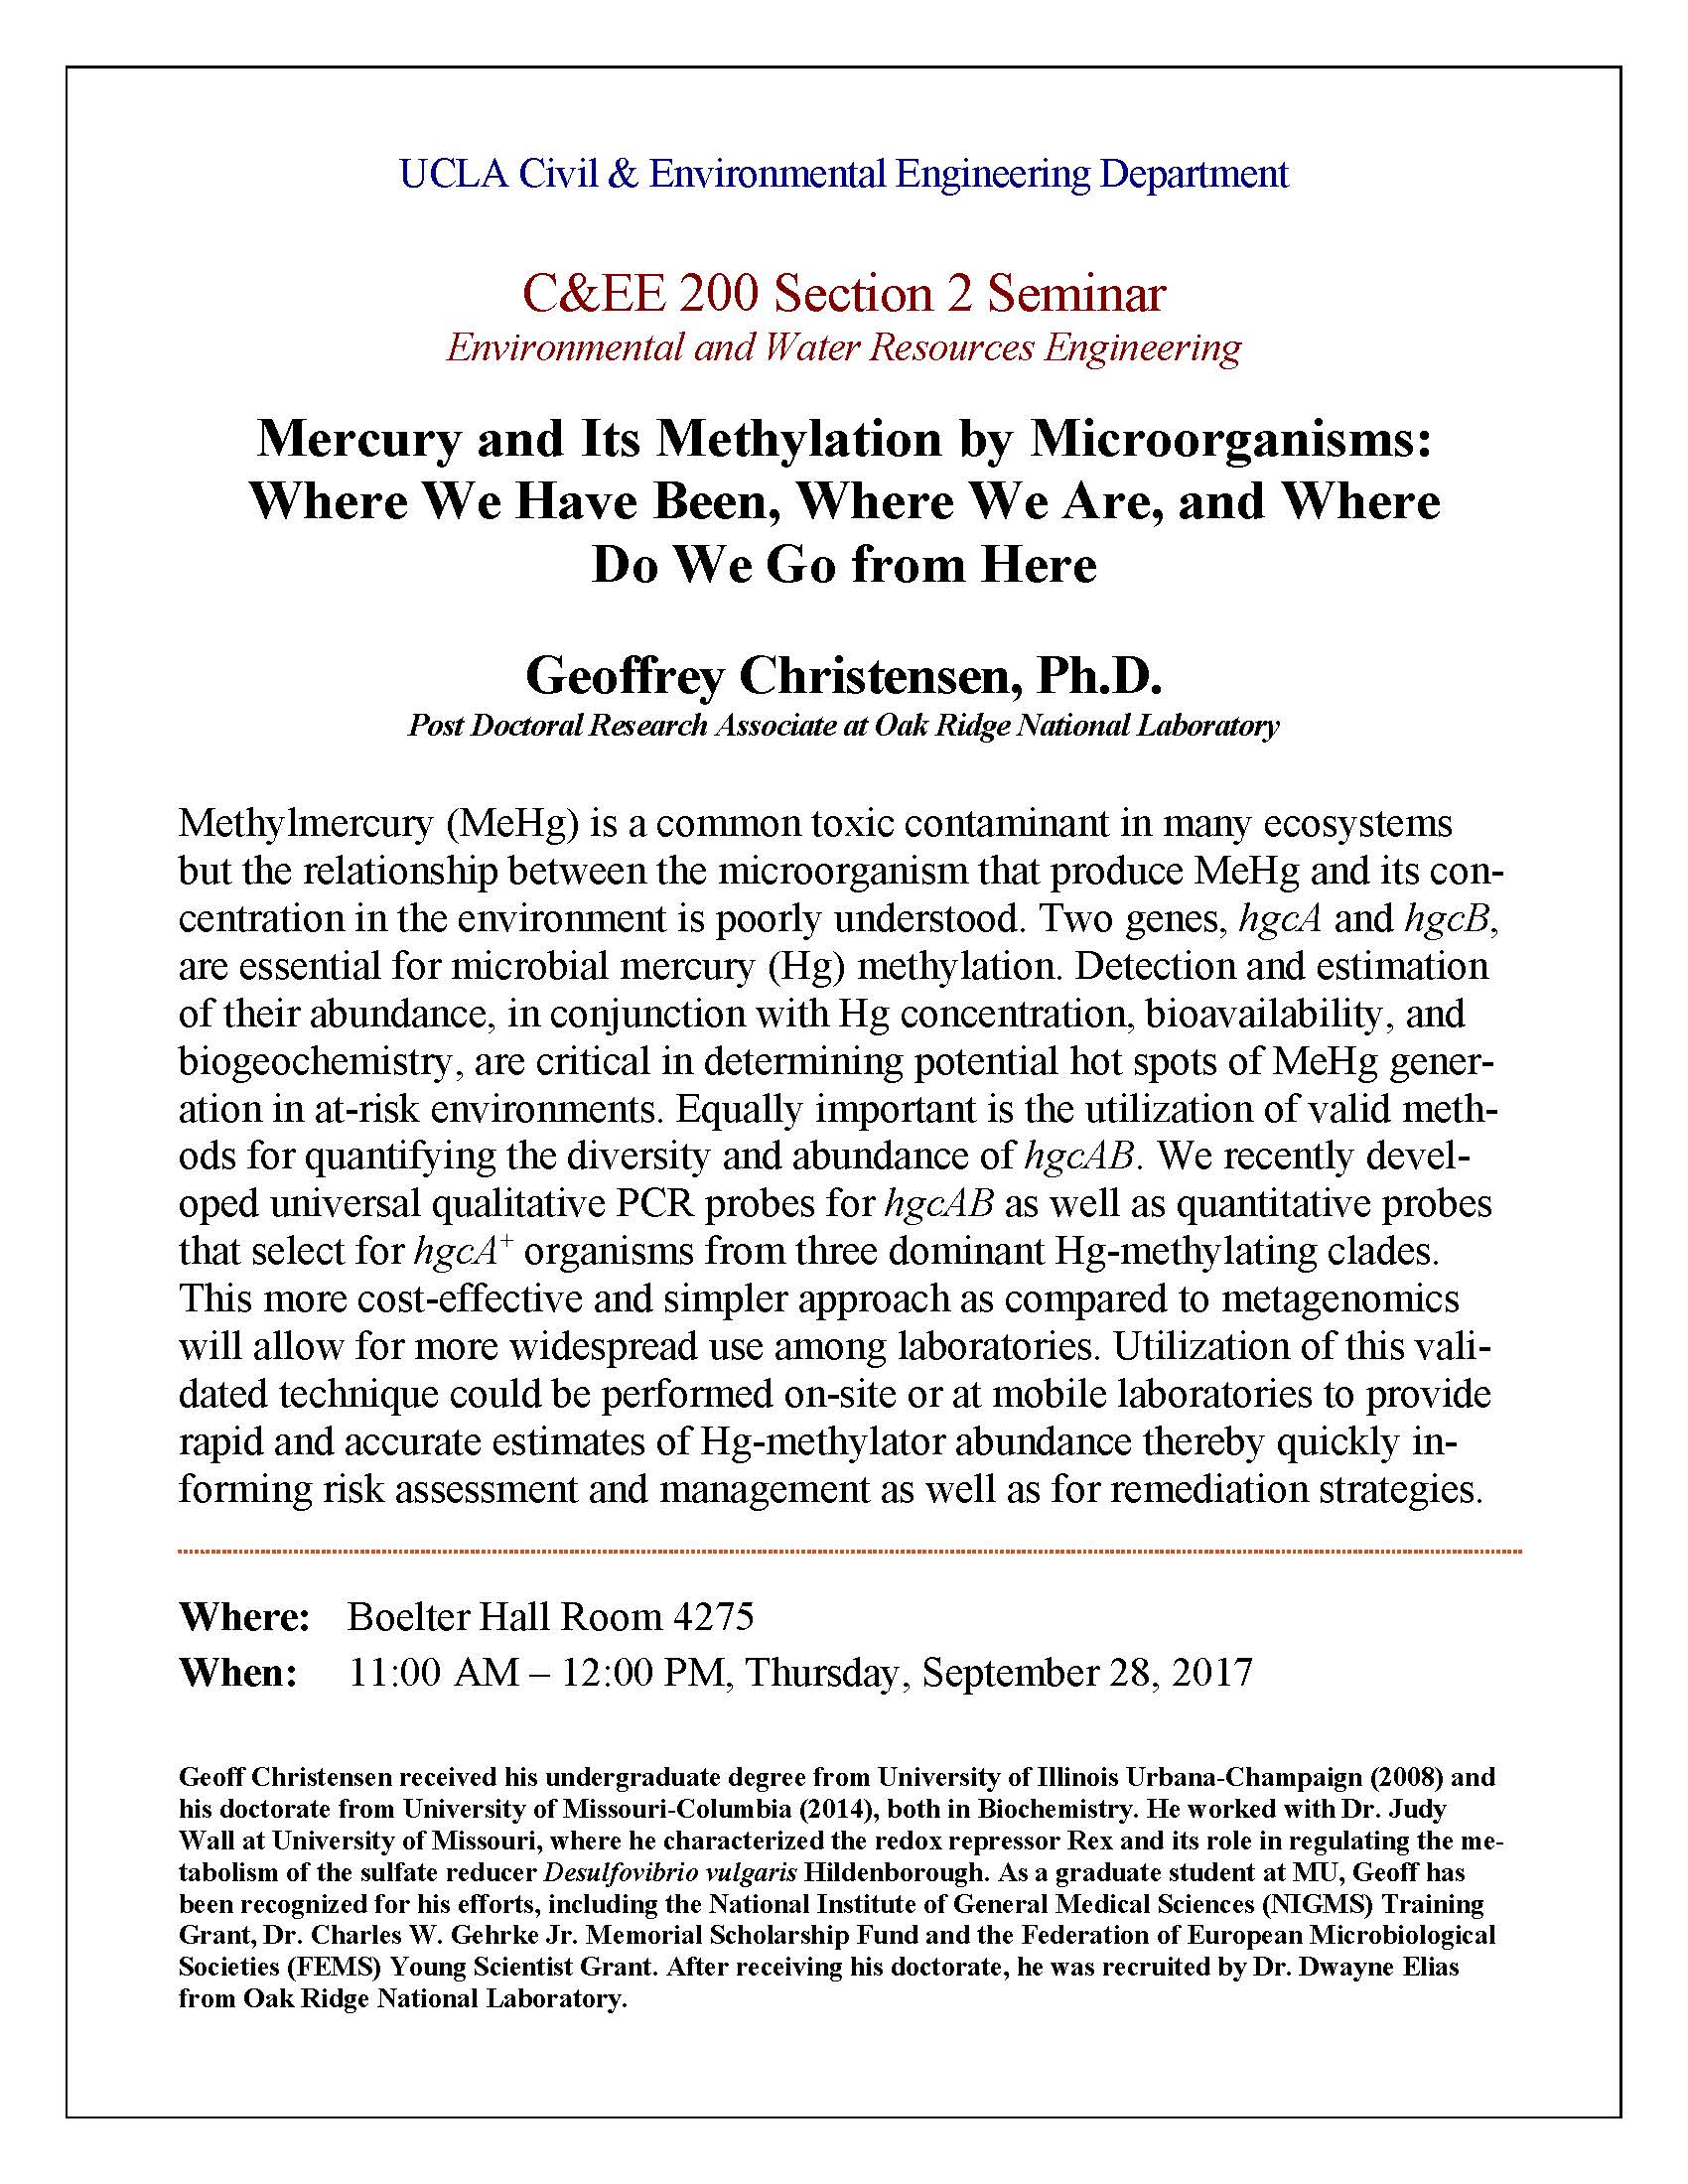 CEE 200 Seminar – Mercury and Its Methylation by Microorganisms: Where We Have Been, Where We Are, and Where Do We Go from Here